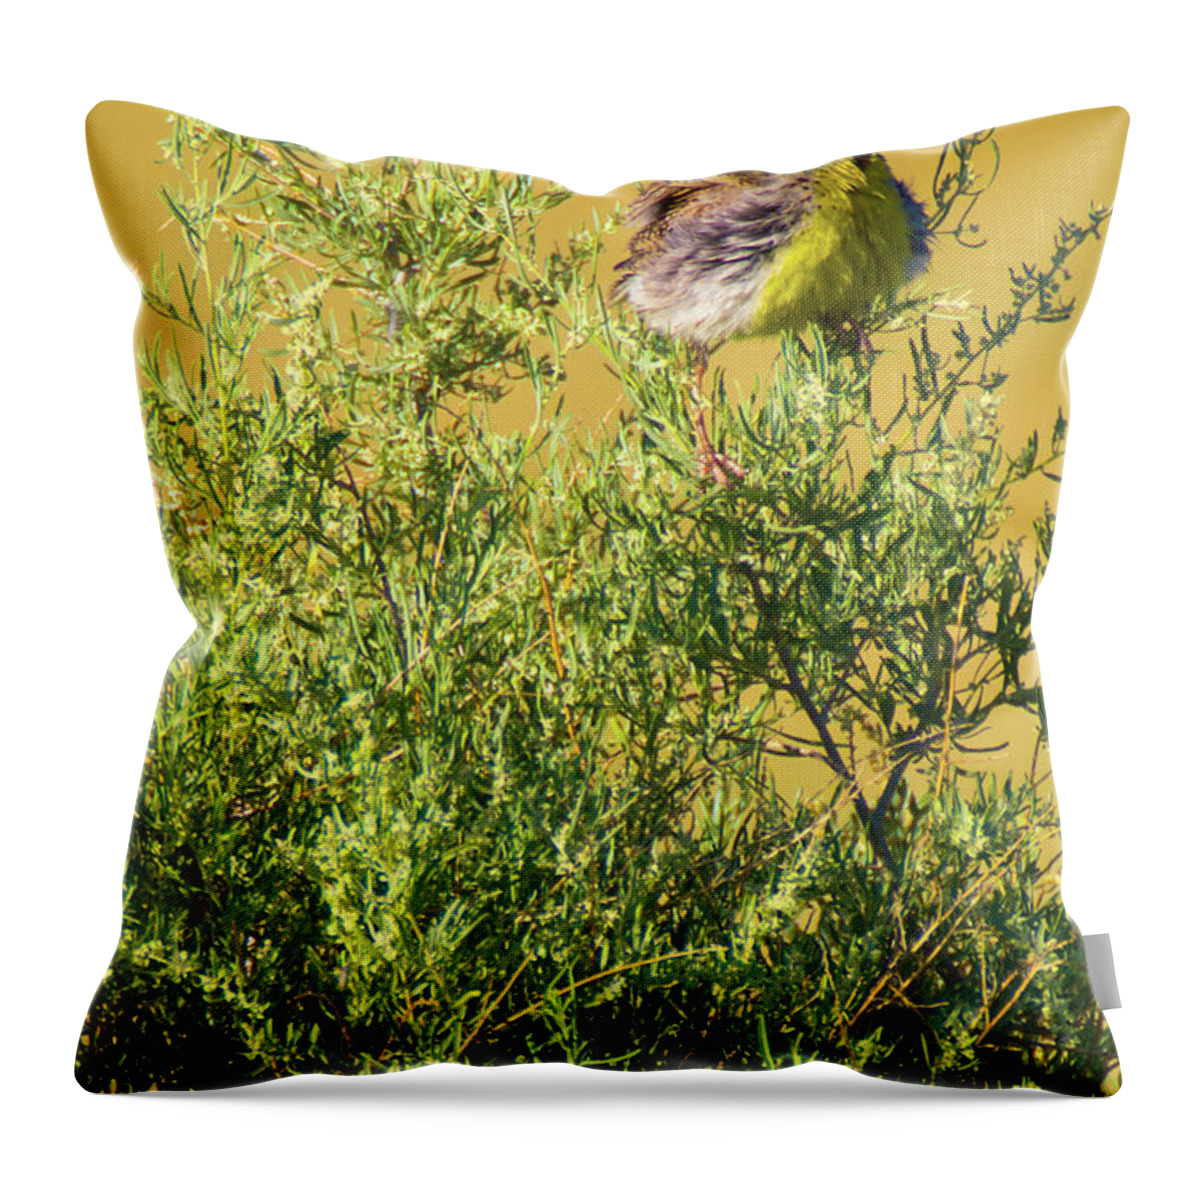 Chatfield State Park Throw Pillow featuring the photograph A Tad Ruffled by John De Bord